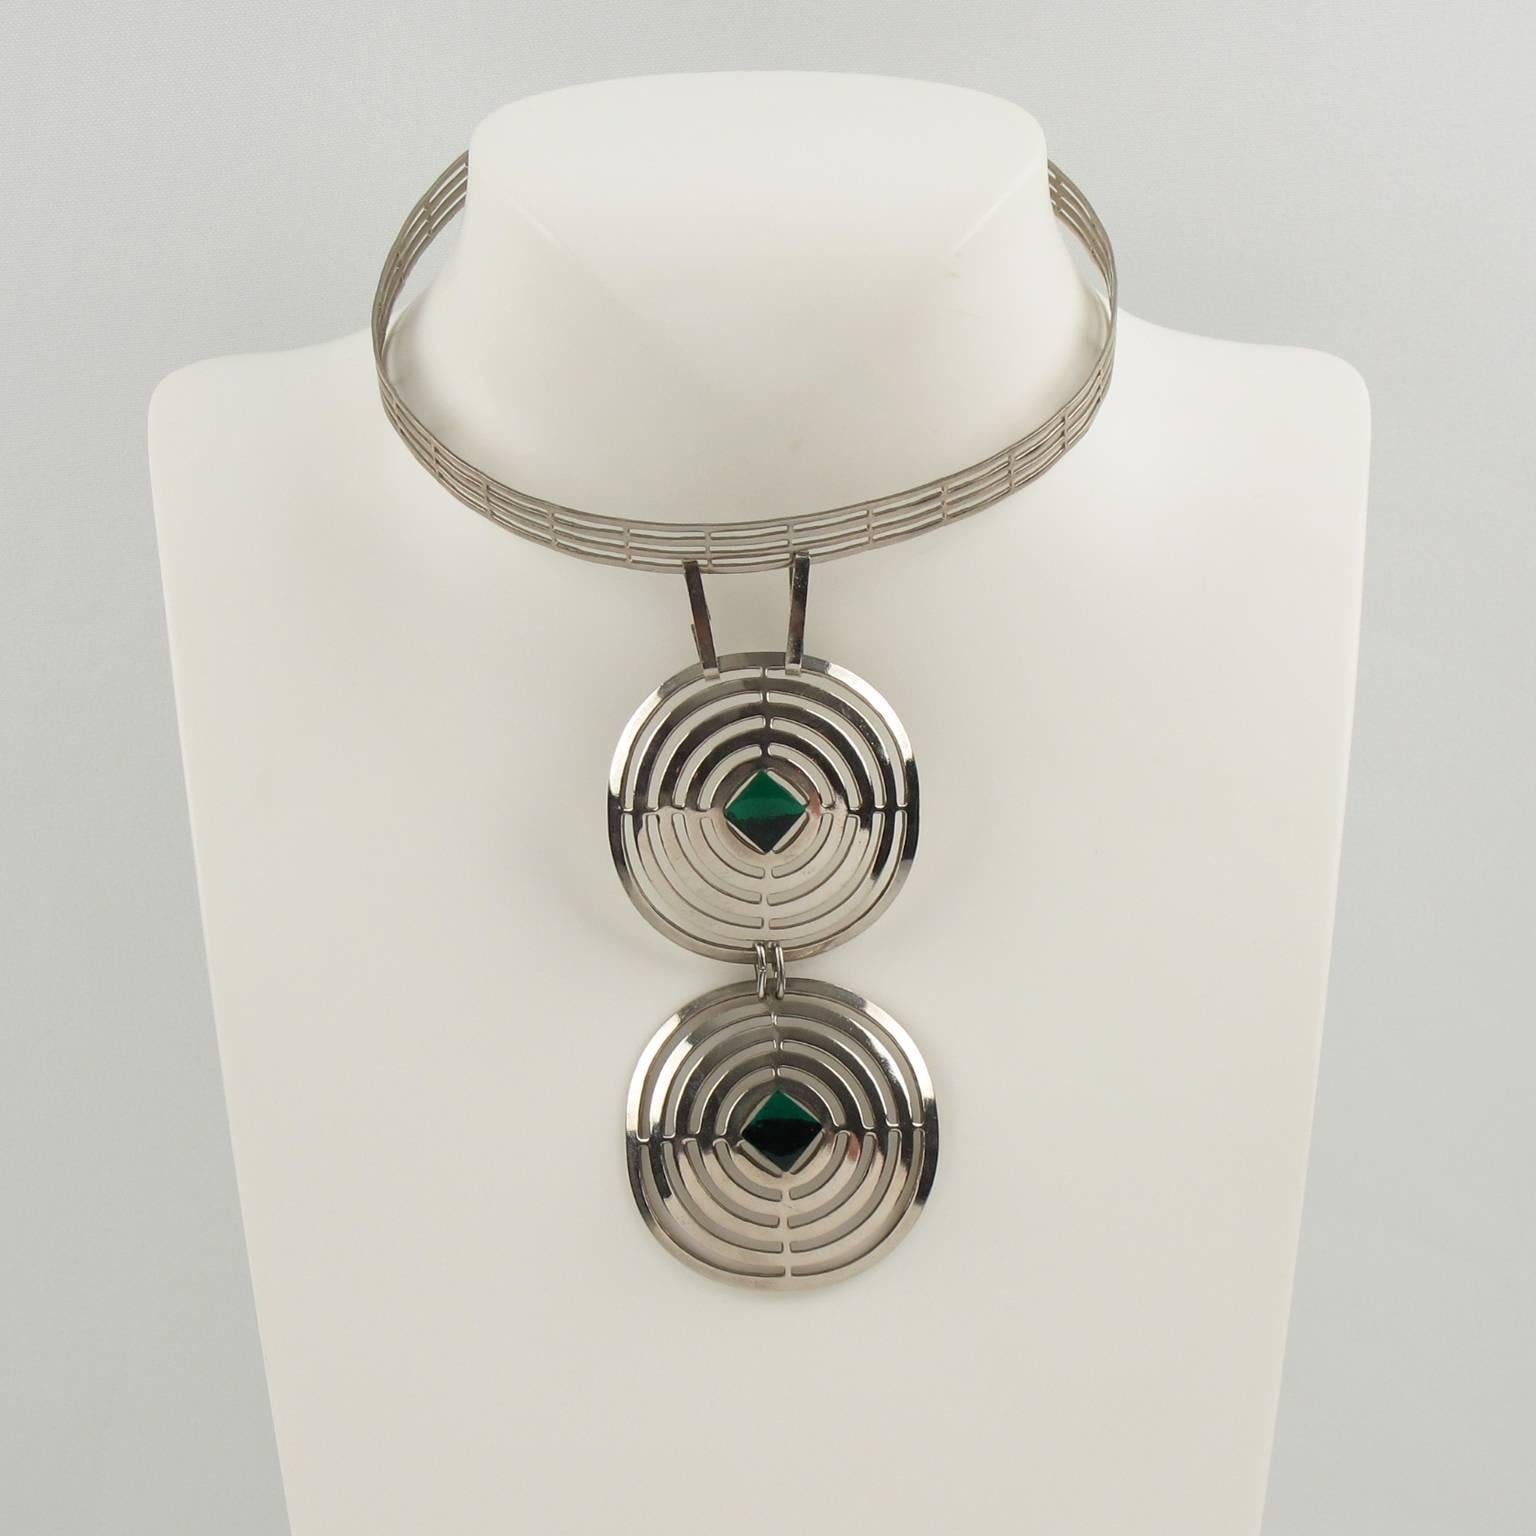 Modernist Mid Century Space Age Chrome and Green Glass Cabochon Dog Collar Necklace